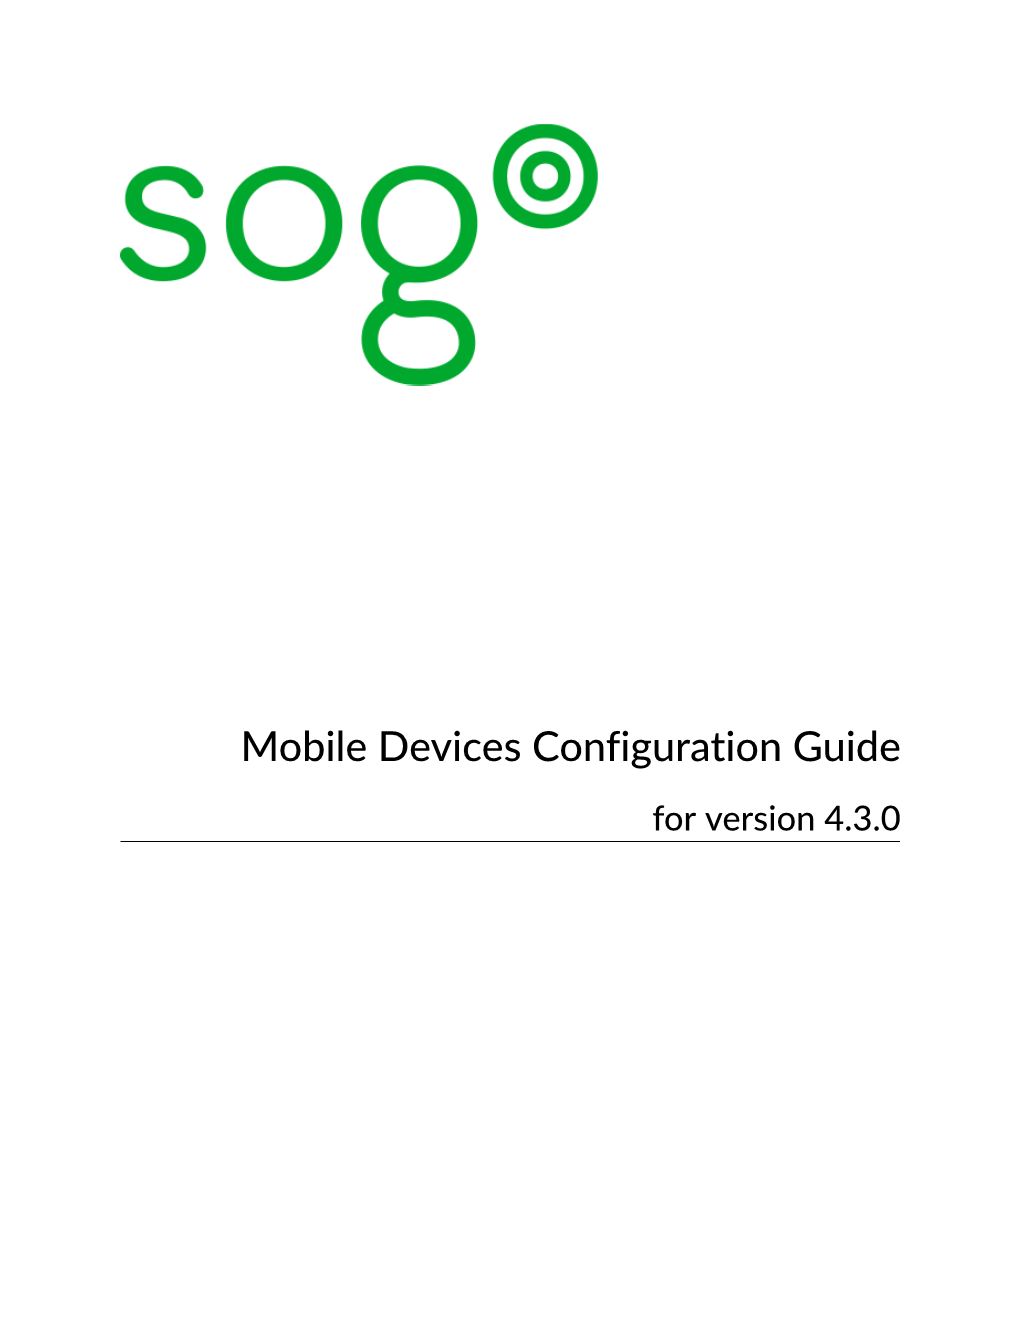 Mobile Devices Configuration Guide for Version 4.3.0 Mobile Devices Configuration Guide Version 4.3.0 - January 2020